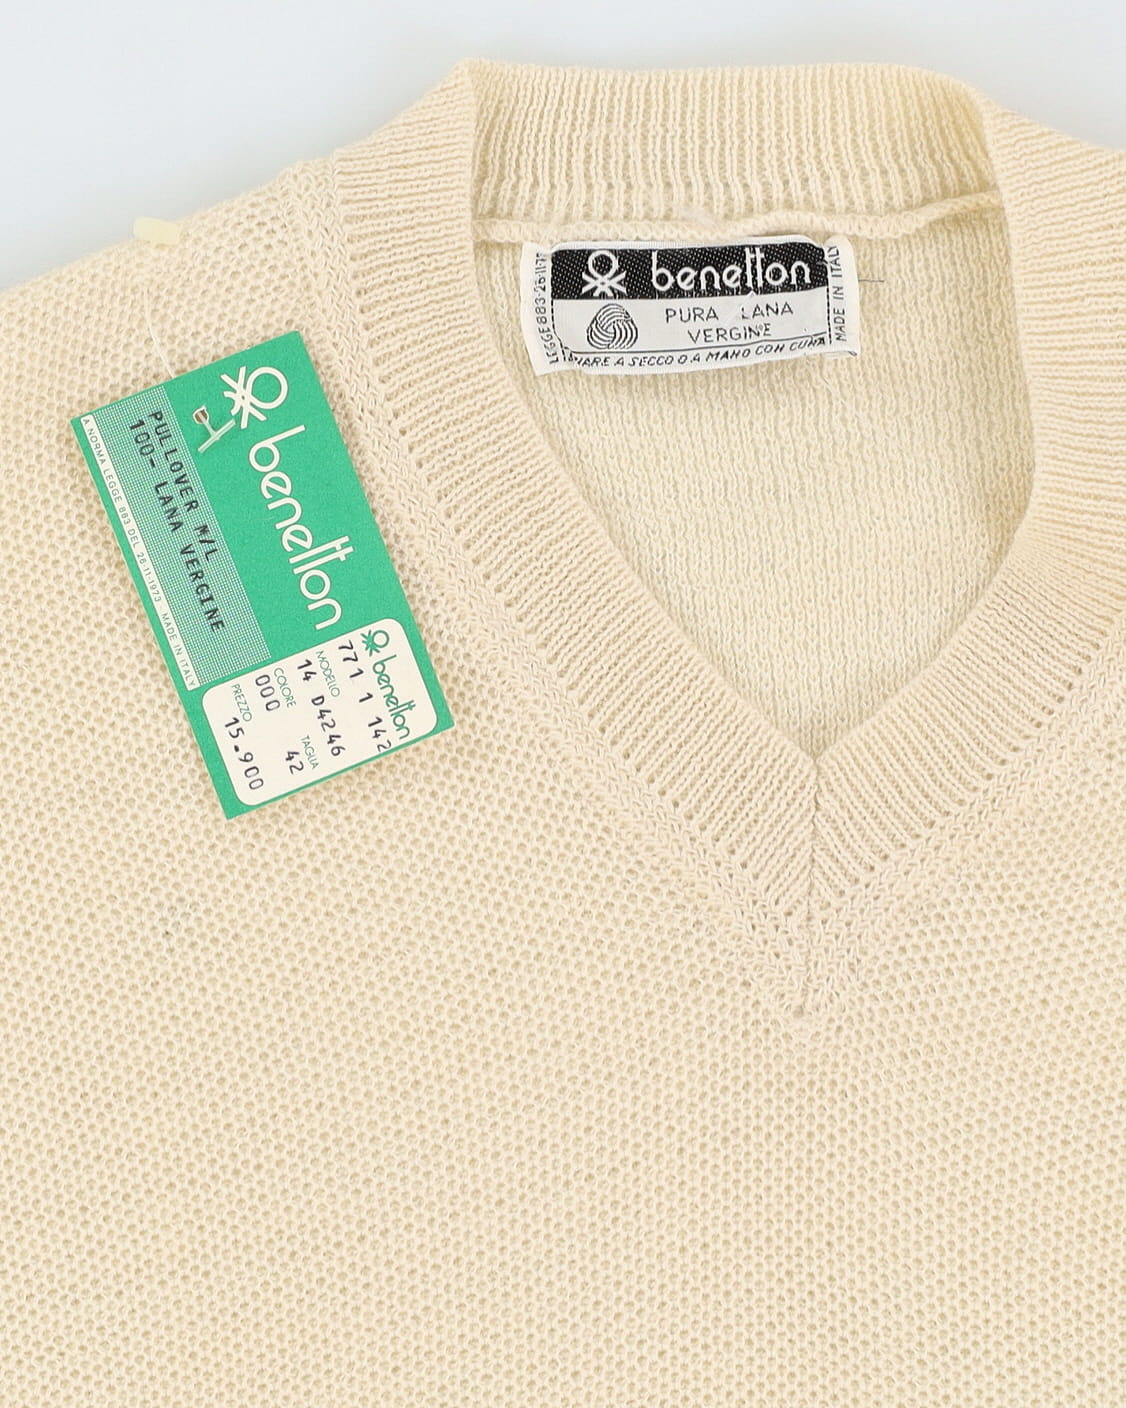 Vintage 70s Deadstock With Tags Benneton Beige Pullover Knit - Youth M